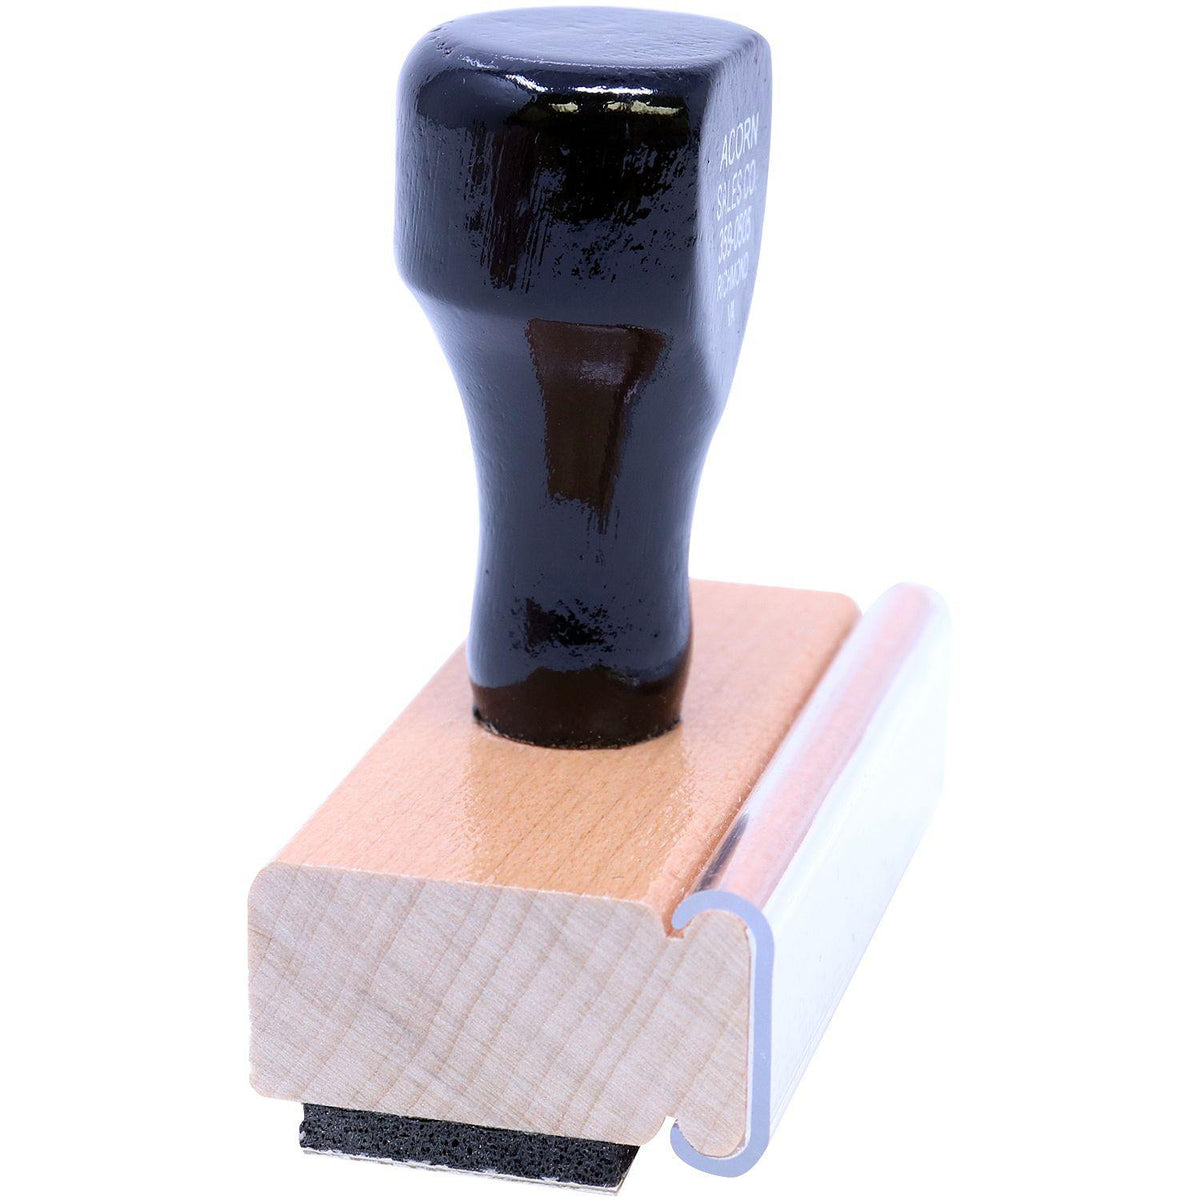 Side View of Large Forwarding Order Expiring Rubber Stamp at an Angle